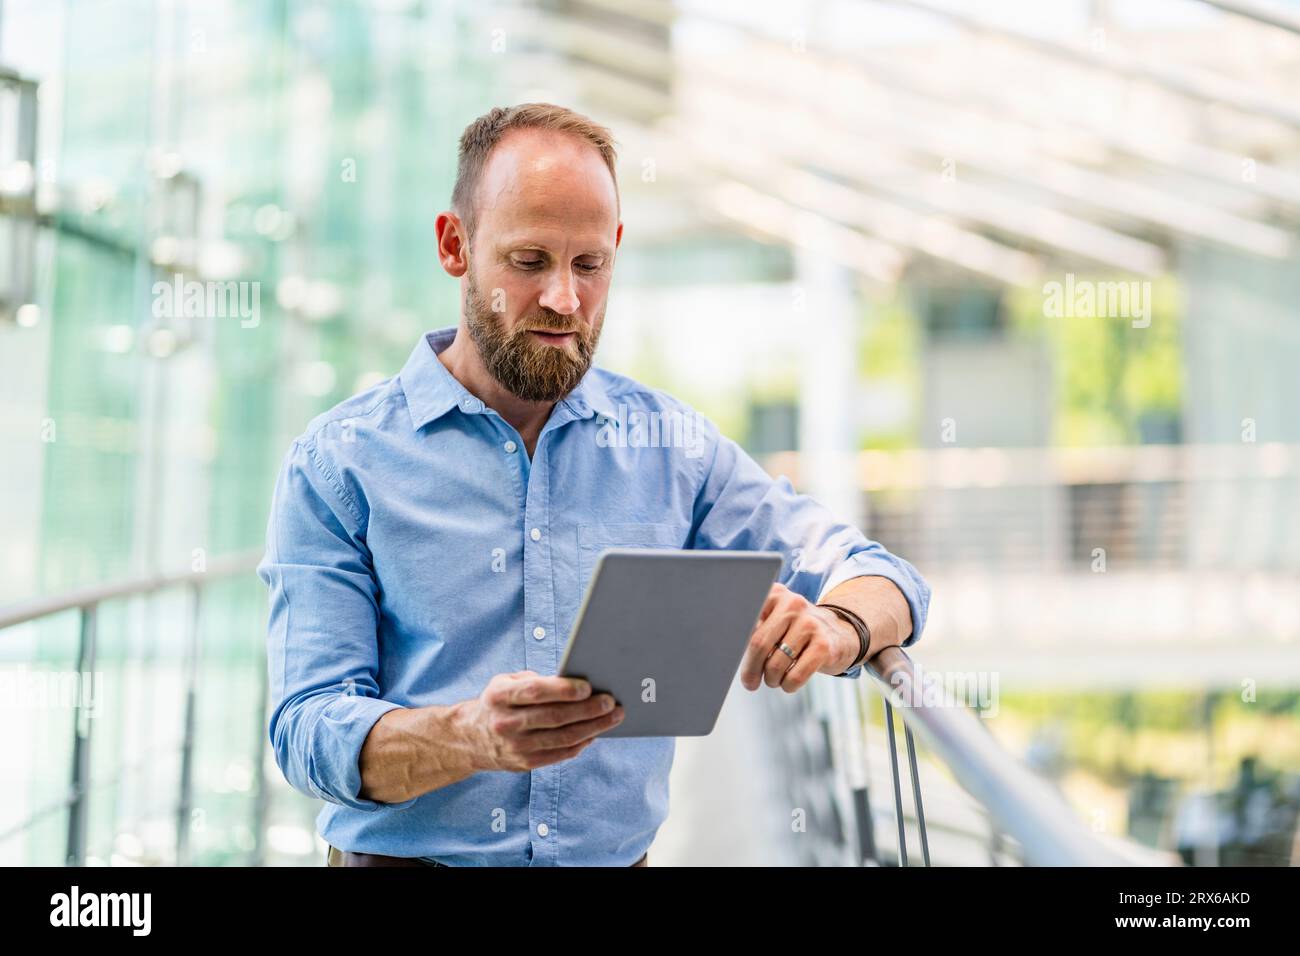 Experienced businessman using digital tablet standing in office building Stock Photo